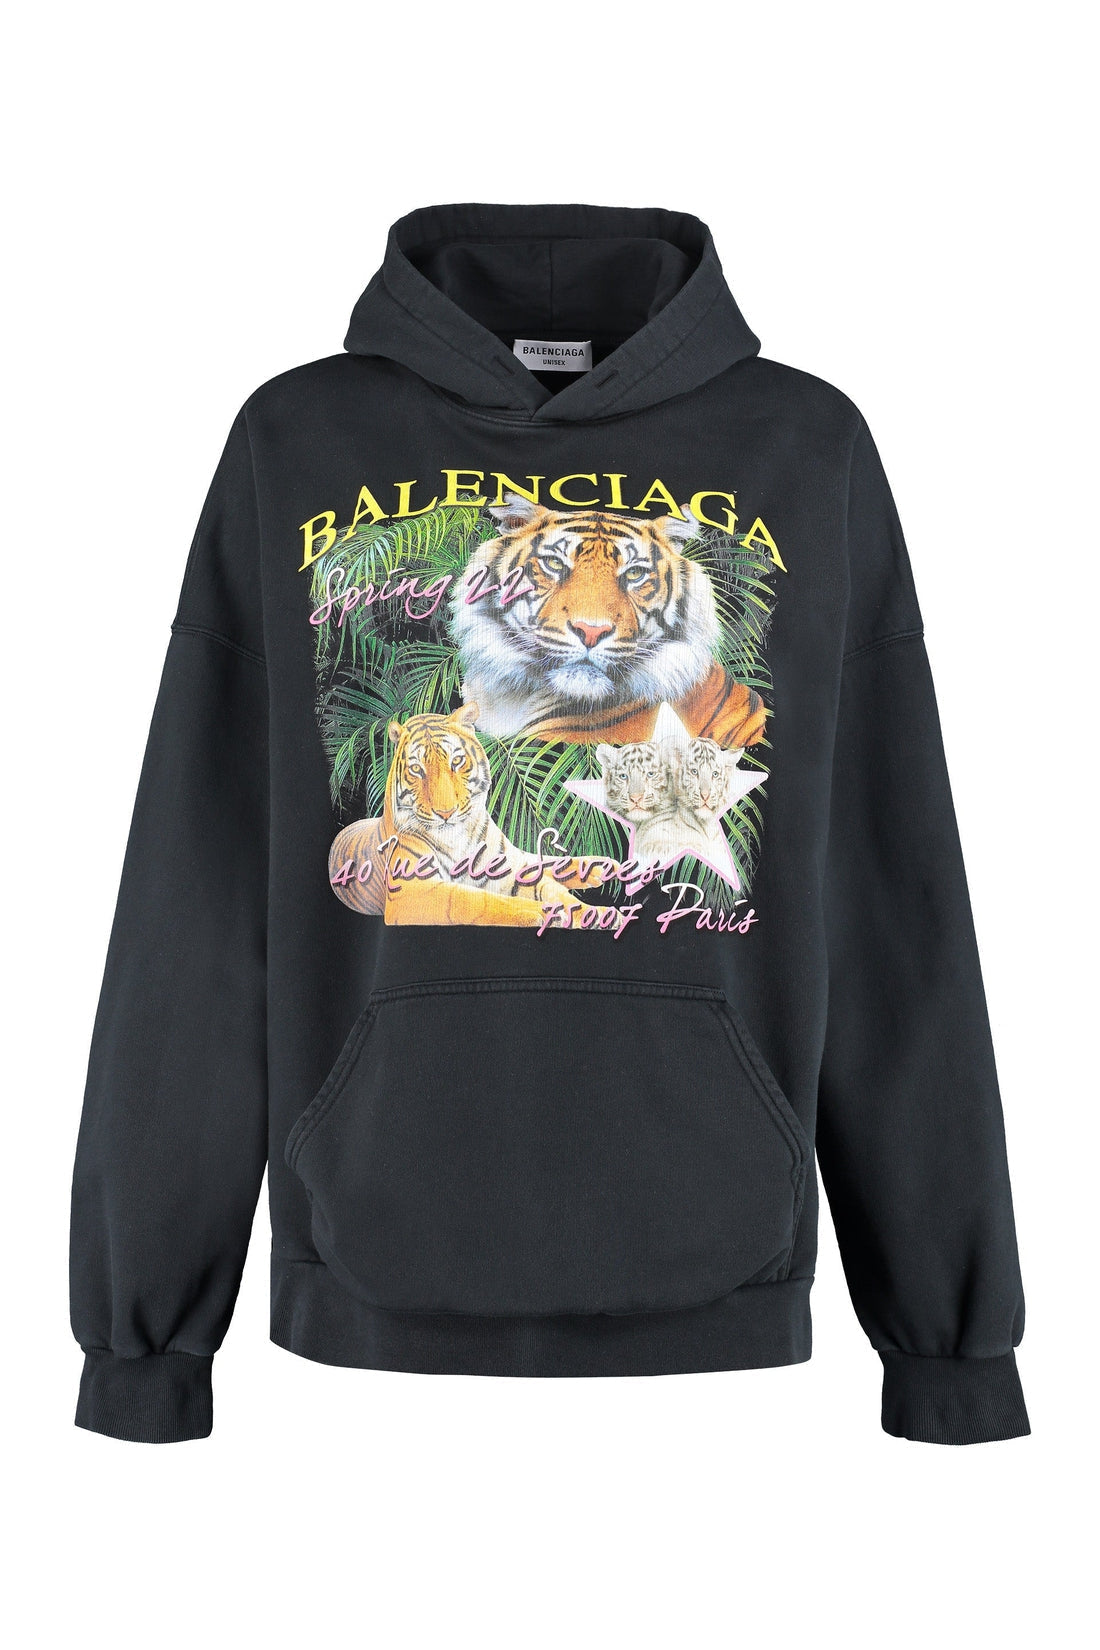 Balenciaga-OUTLET-SALE-Cropped hoodie-ARCHIVIST